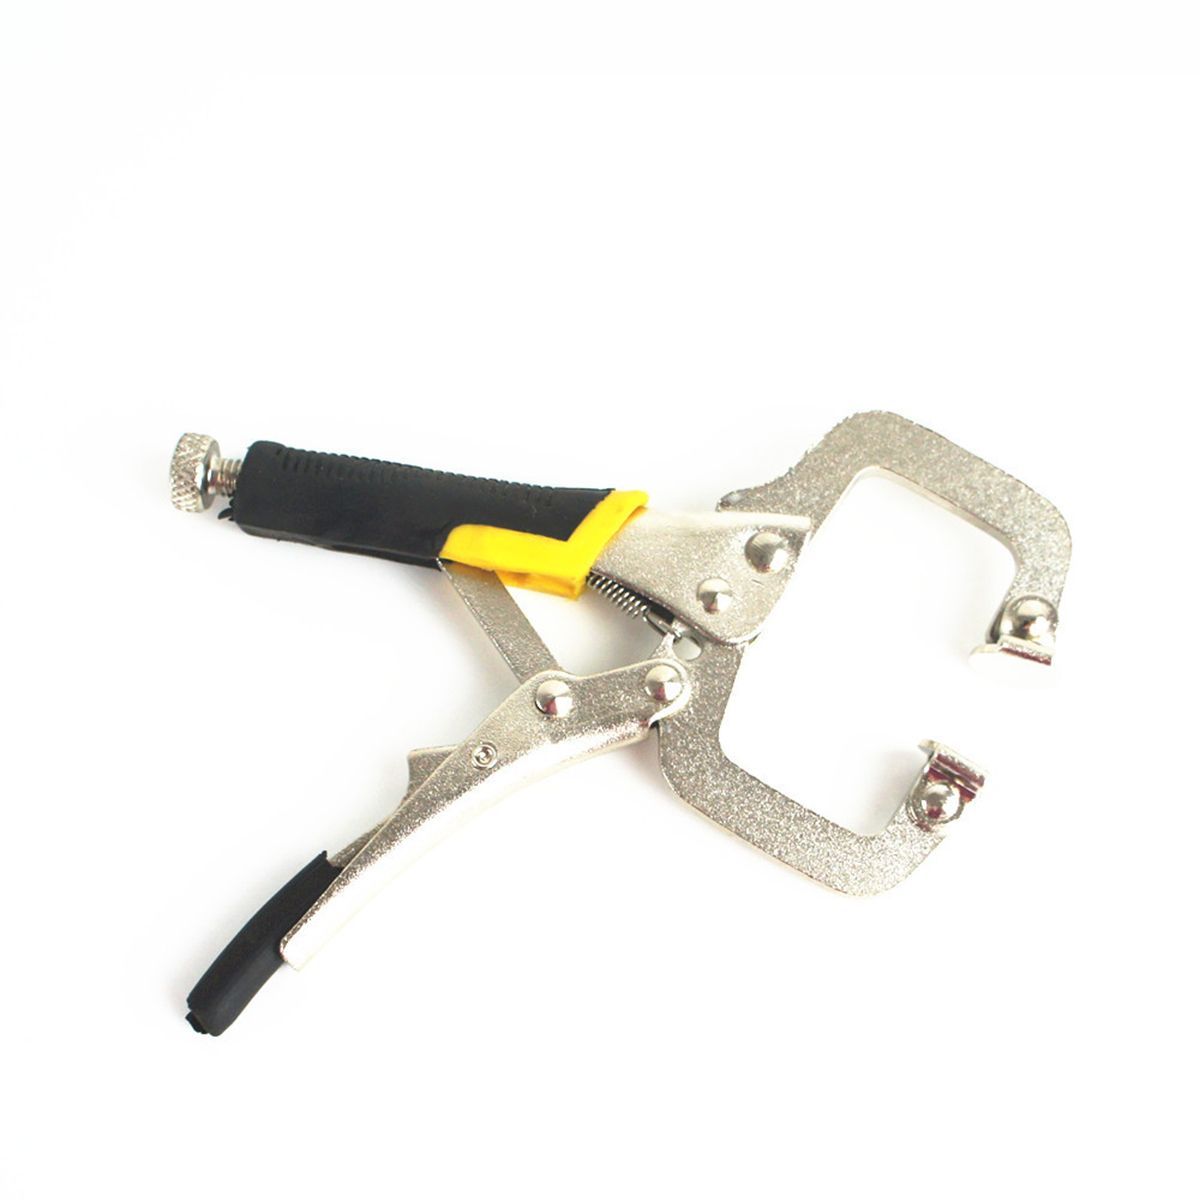 3-Piece-Mini-Vice-Grip-Kit-Complete-Locking-C-Clamp-Straight-Nose-and-Needle-Long-Nose-Pliers-set-1559062